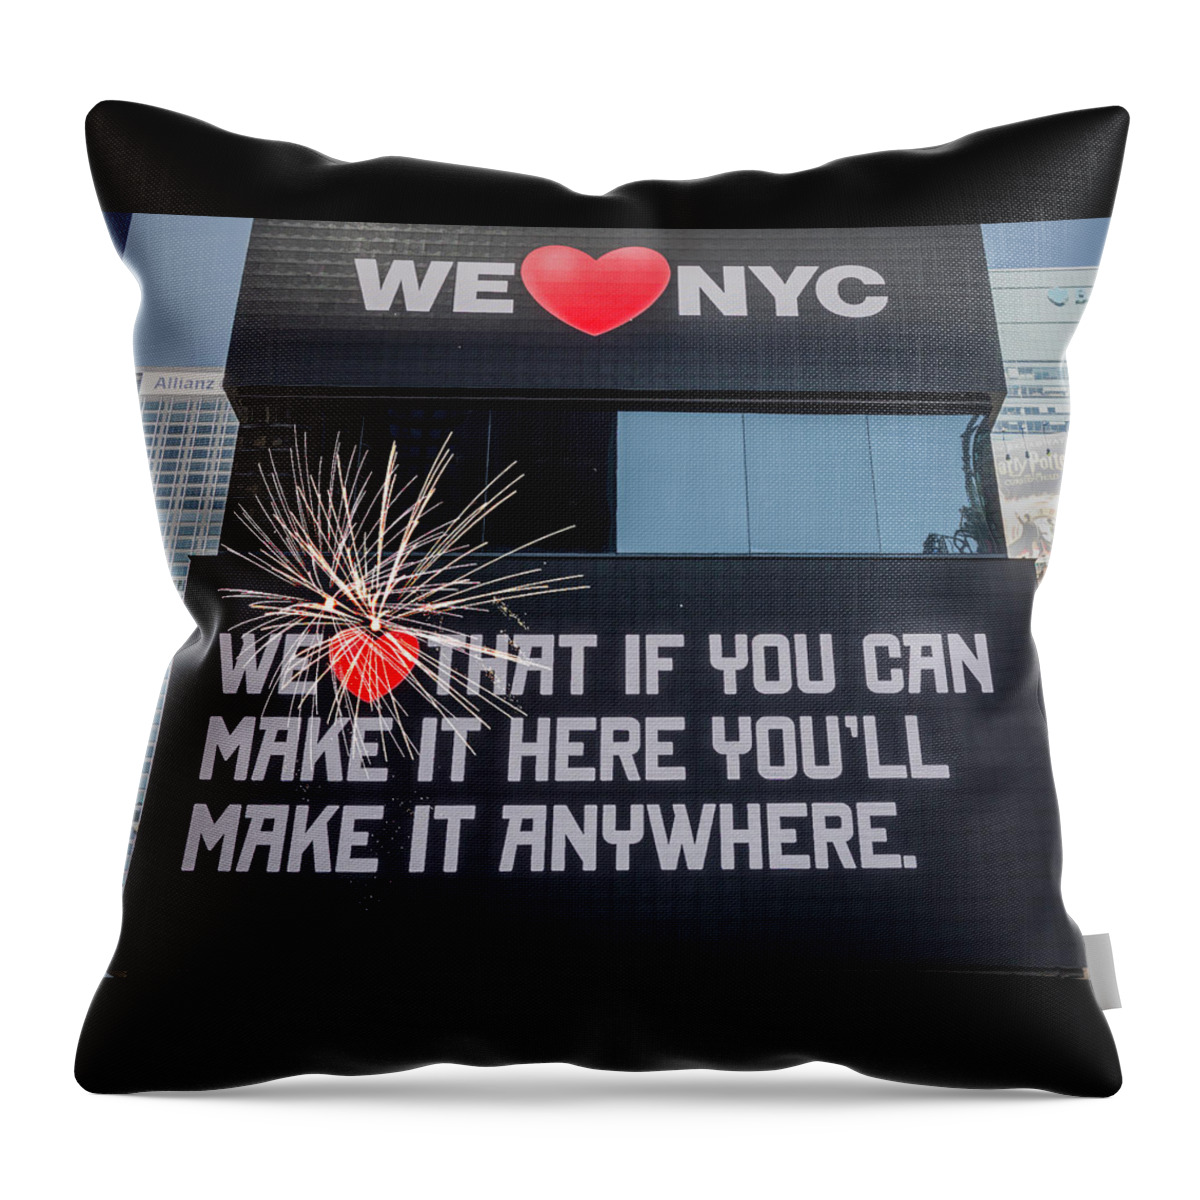 Debra Martz Throw Pillow featuring the photograph We Love NYC Times Square Sign by Debra Martz